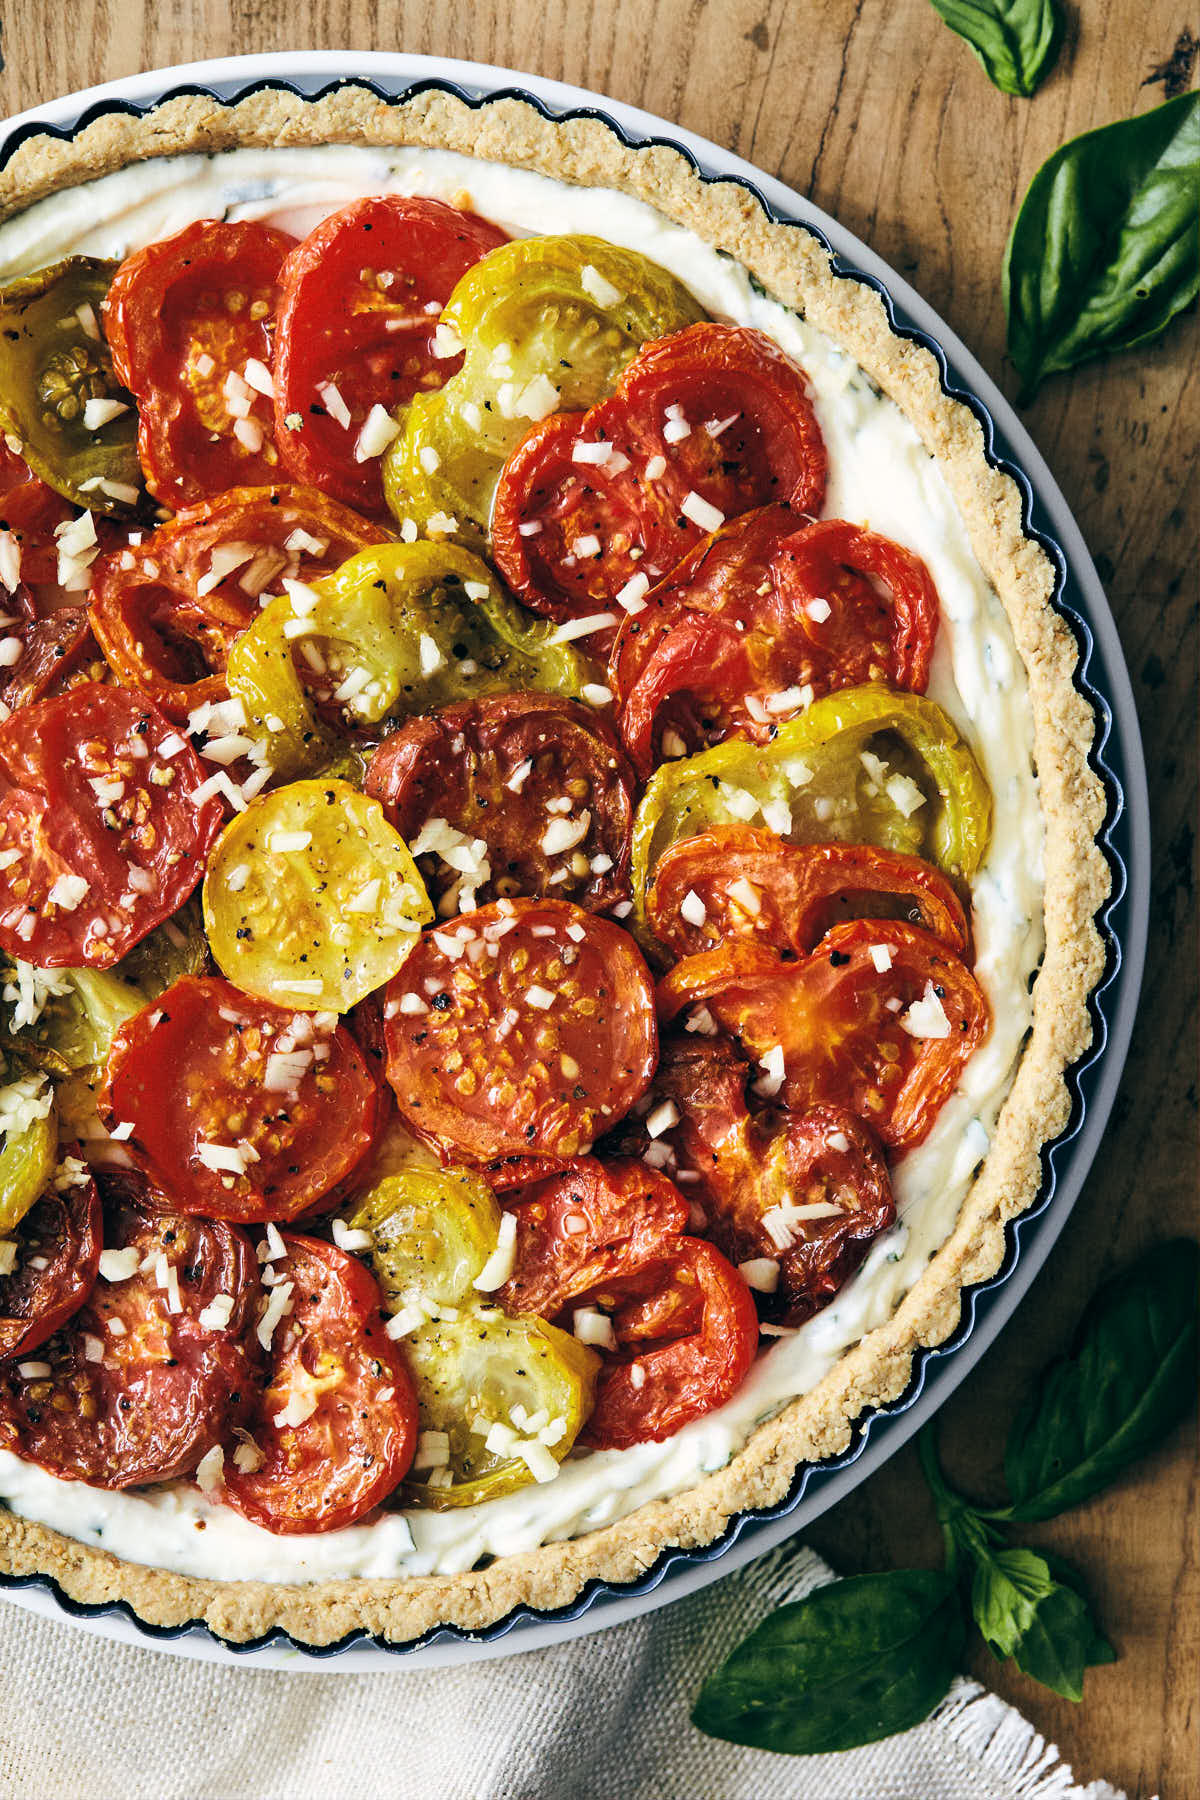 Heirloom tomato tart in a baking pan before going into oven